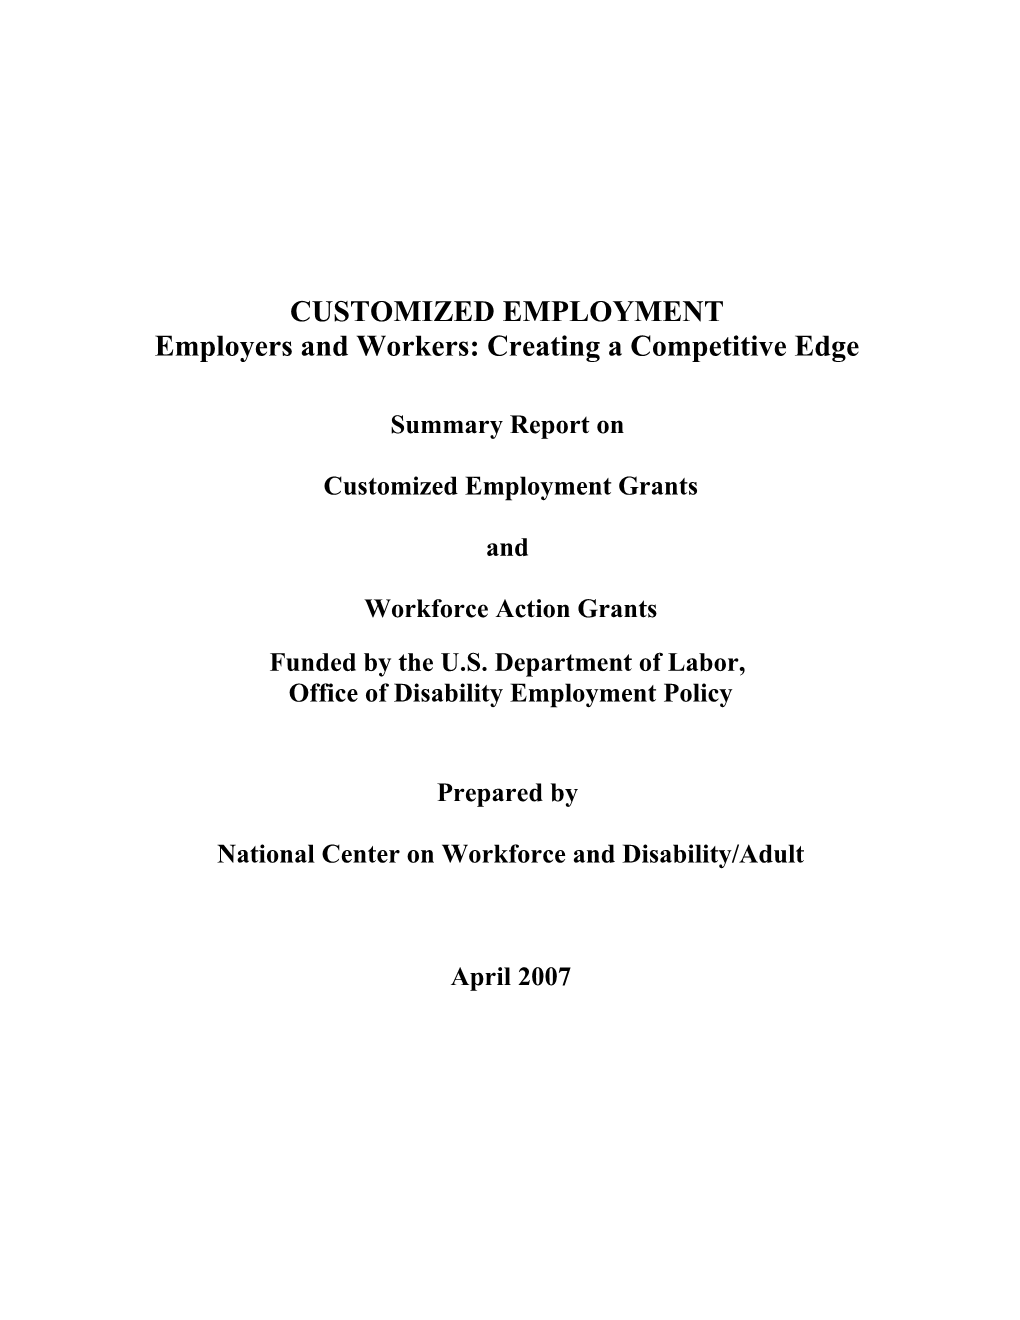 Employers and Workers: Creating a Competitive Edge